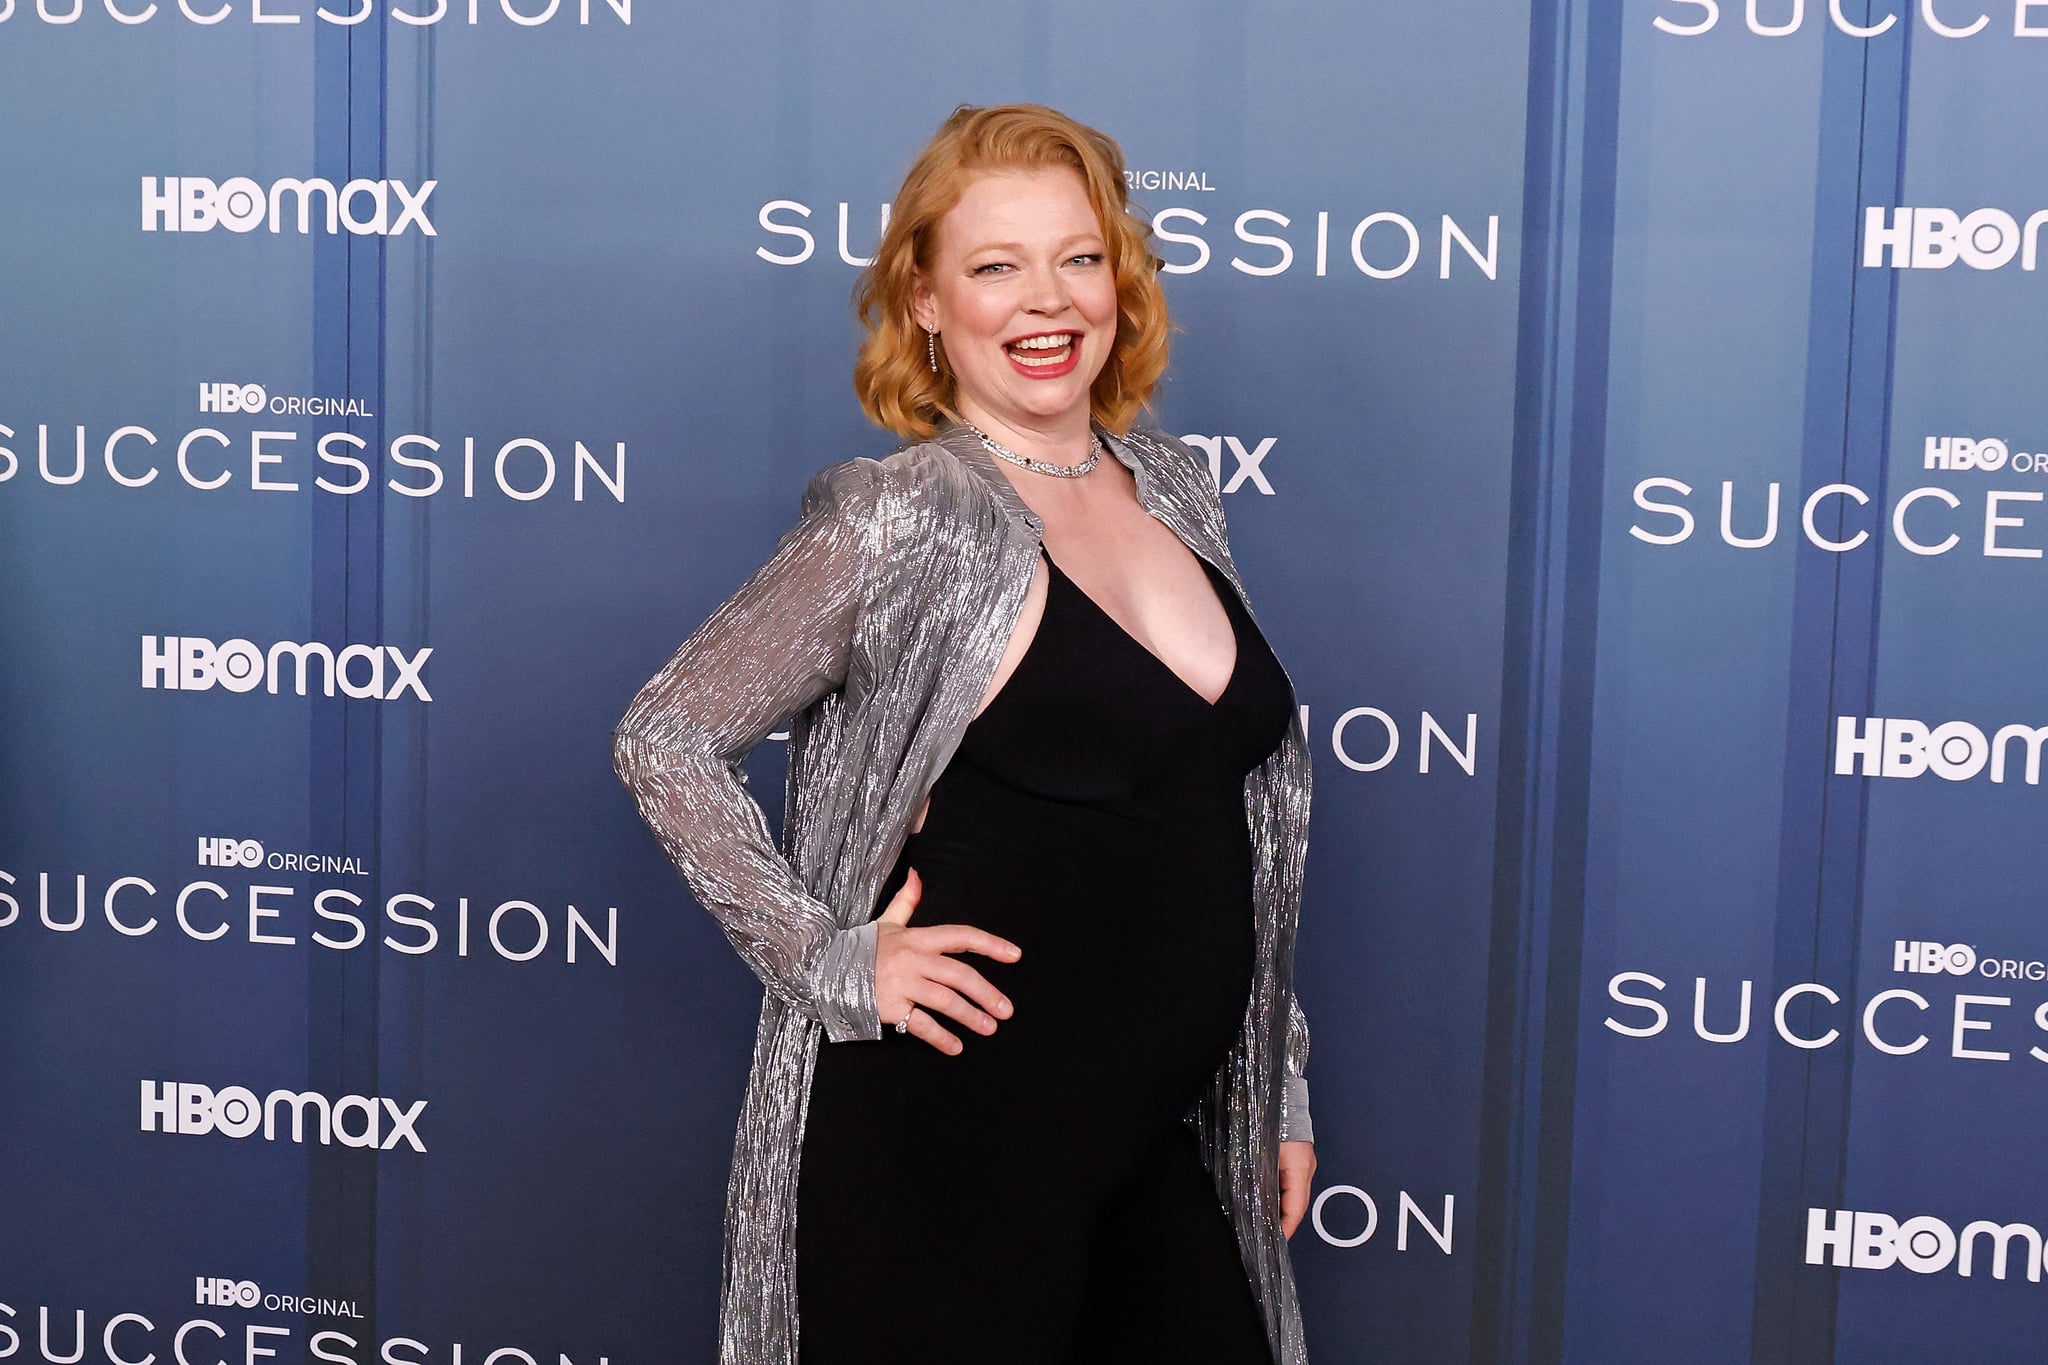 NEW YORK, NEW YORK - MARCH 20: Sarah Snook attends HBO's season 4 premiere 